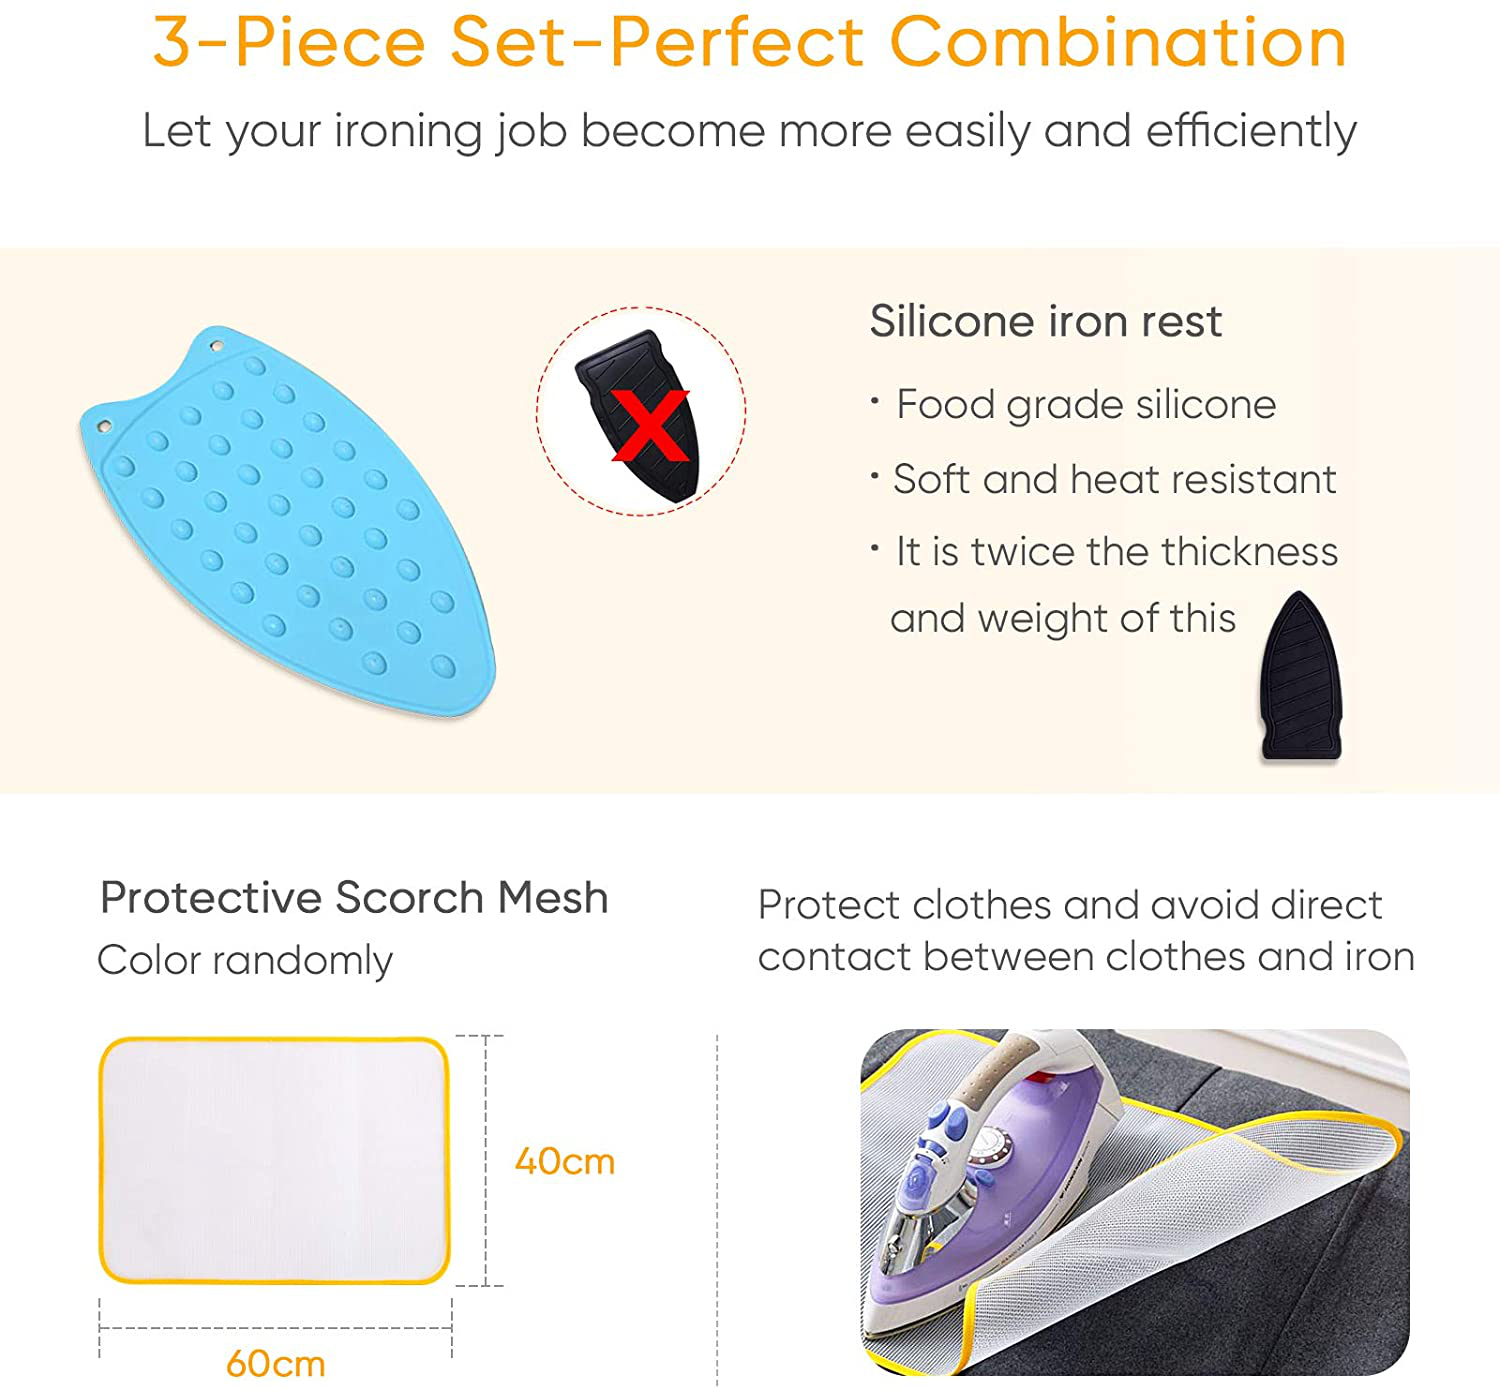 Upgraded Thick Ironing Mat,Travel Ironing Blanket Ironing Pad,Portable Double-Side Using,Heat Resistant Pad Cover for Washer,Dryer,Table Top,Countertop,Ironing Board for Small Space (22 x 47 inch)